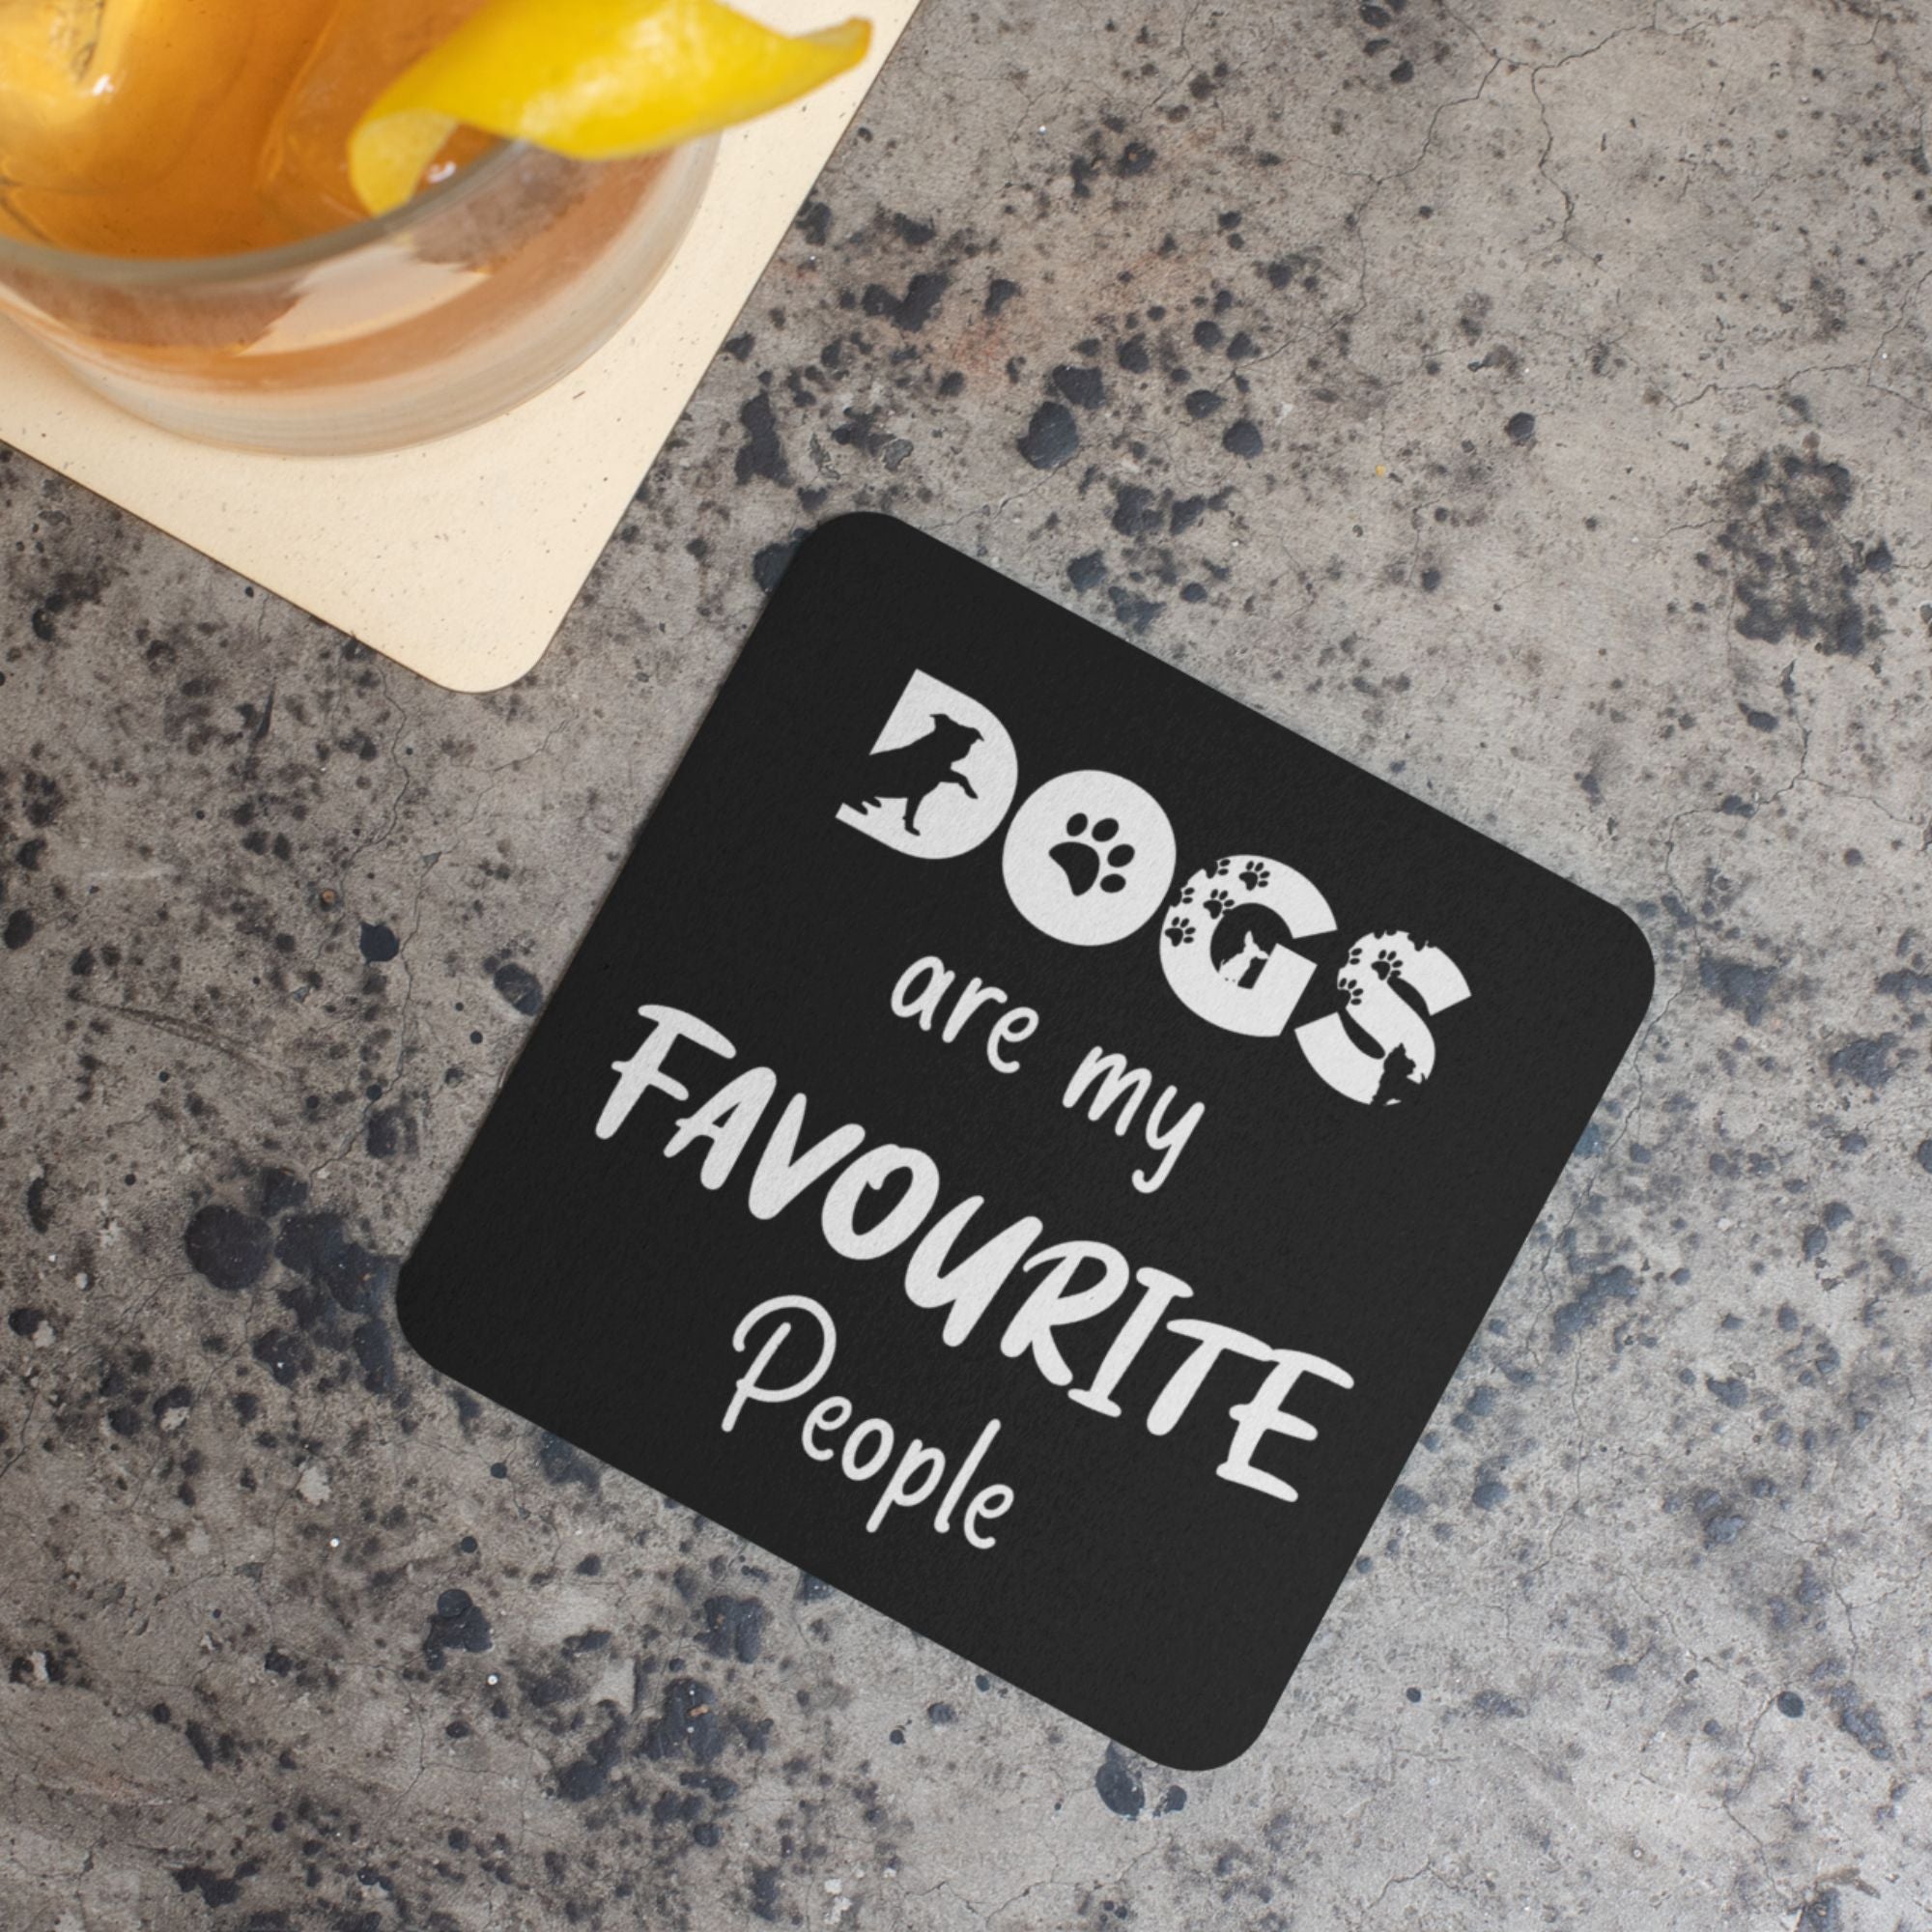 Coasters Dogs Are My Favourite People - Sweetie